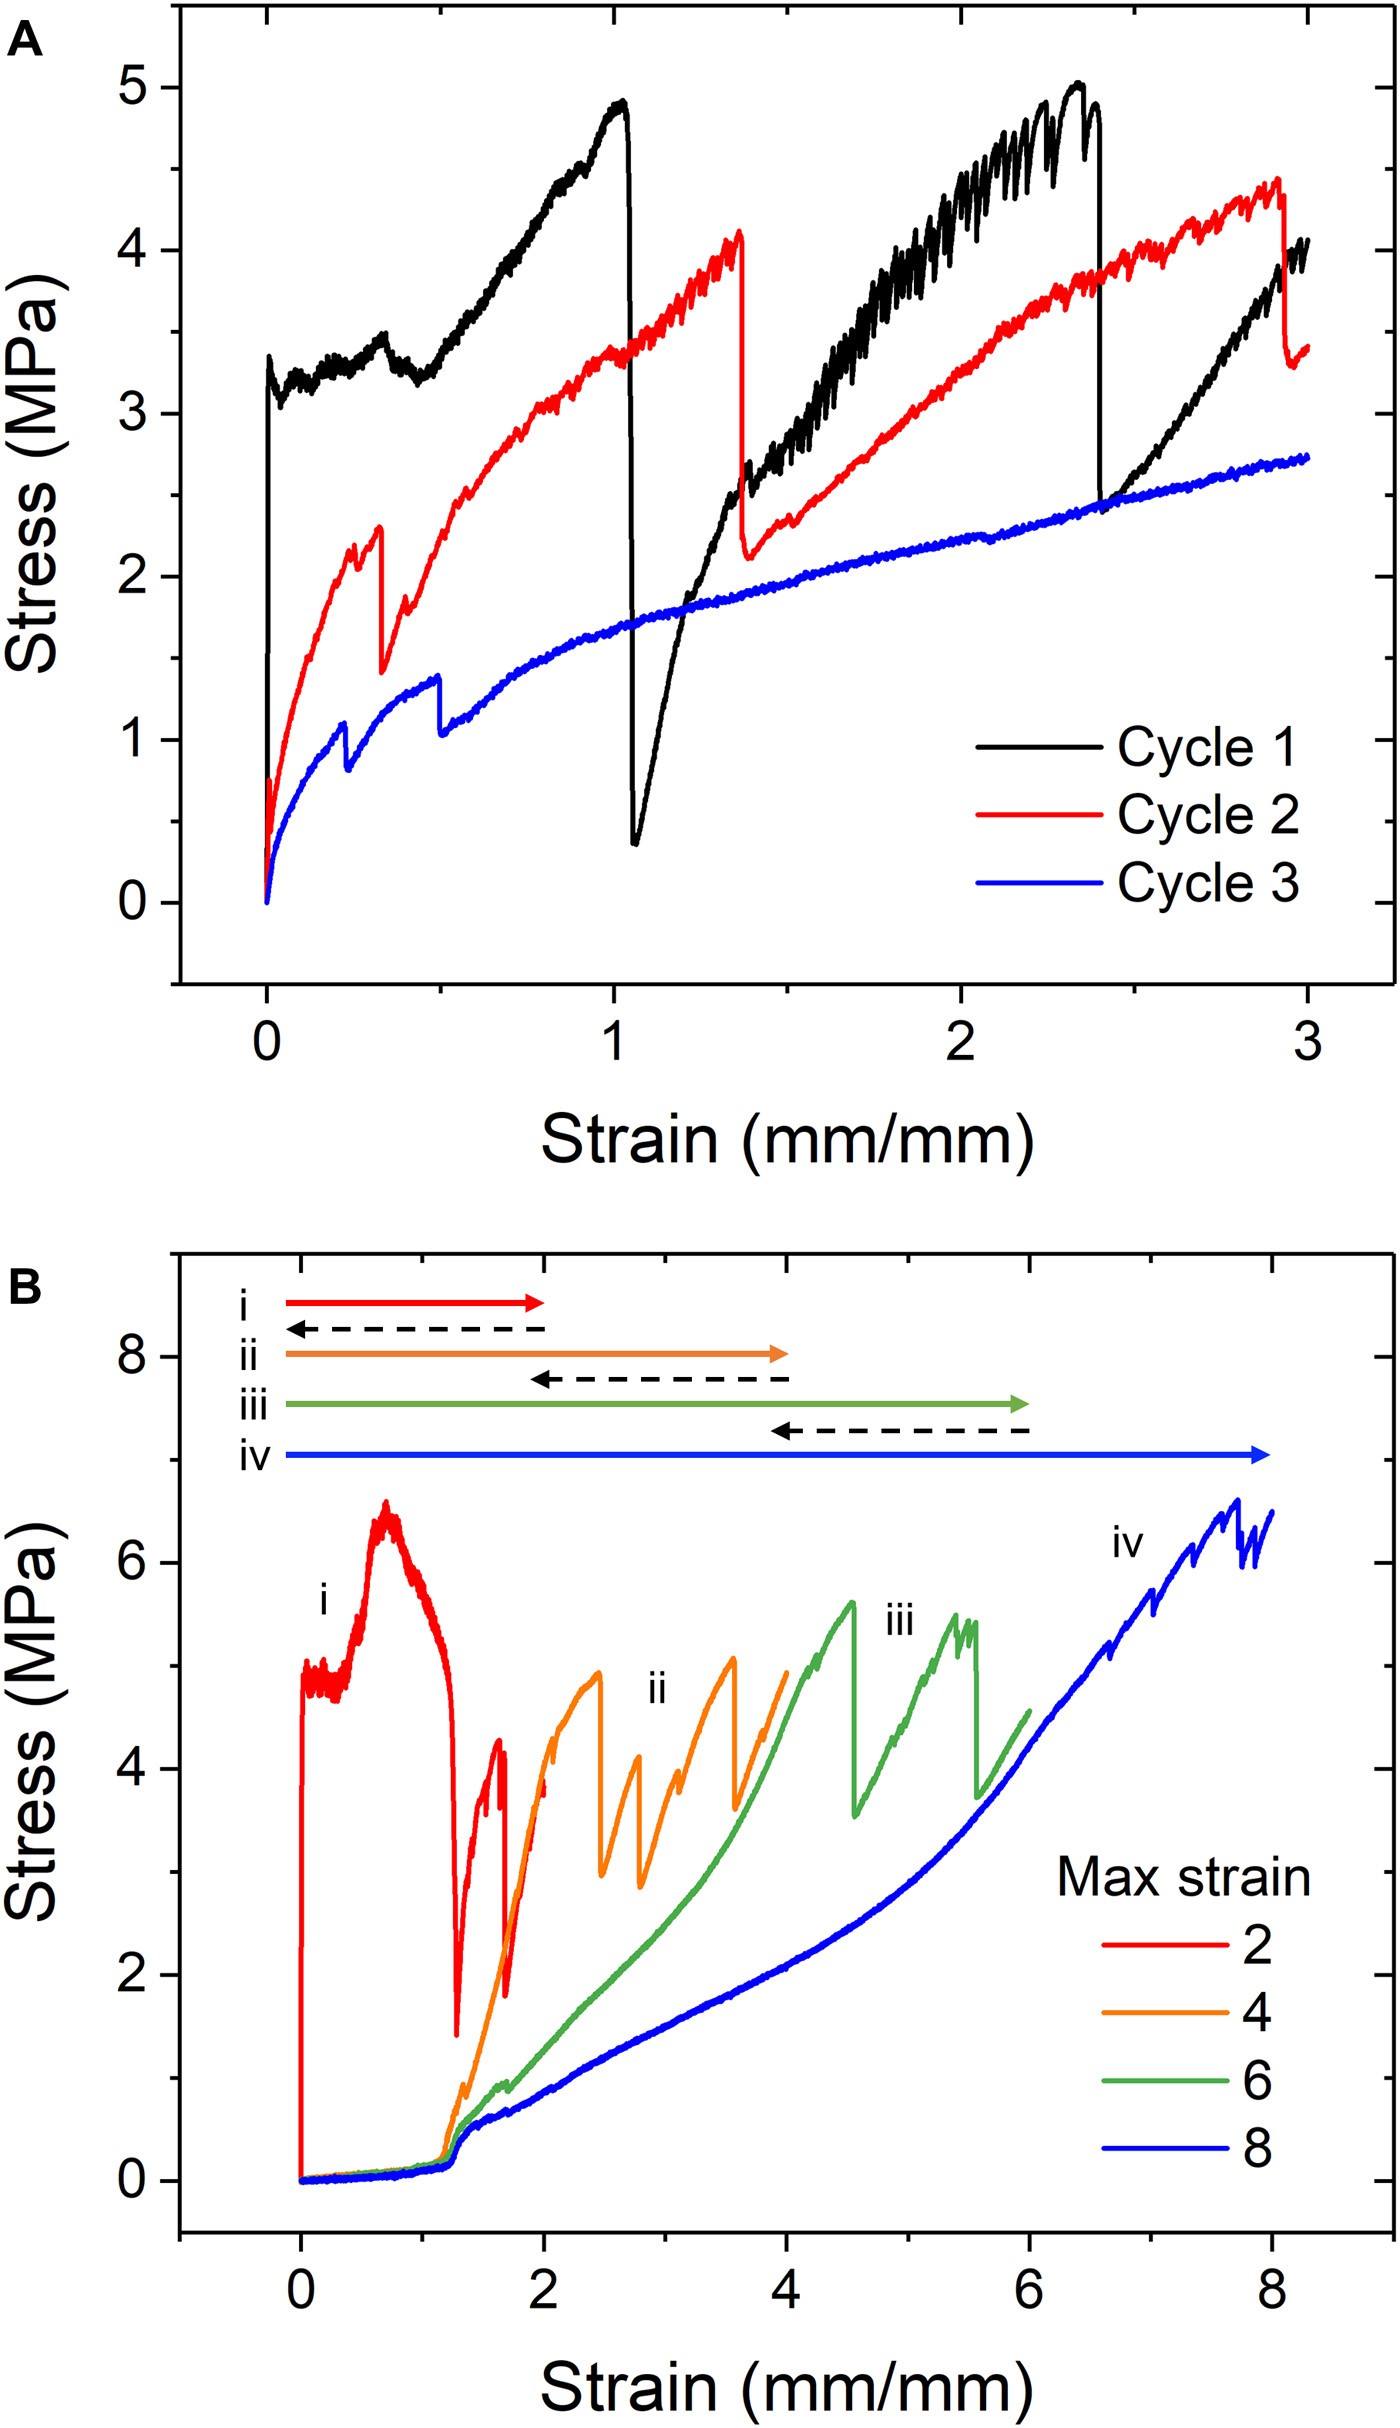 Stress Strain Diagrams for Engineering Materials toughening Stretchable Fibers Via Serial Fracturing Of A Metallic Of Stress Strain Diagrams for Engineering Materials